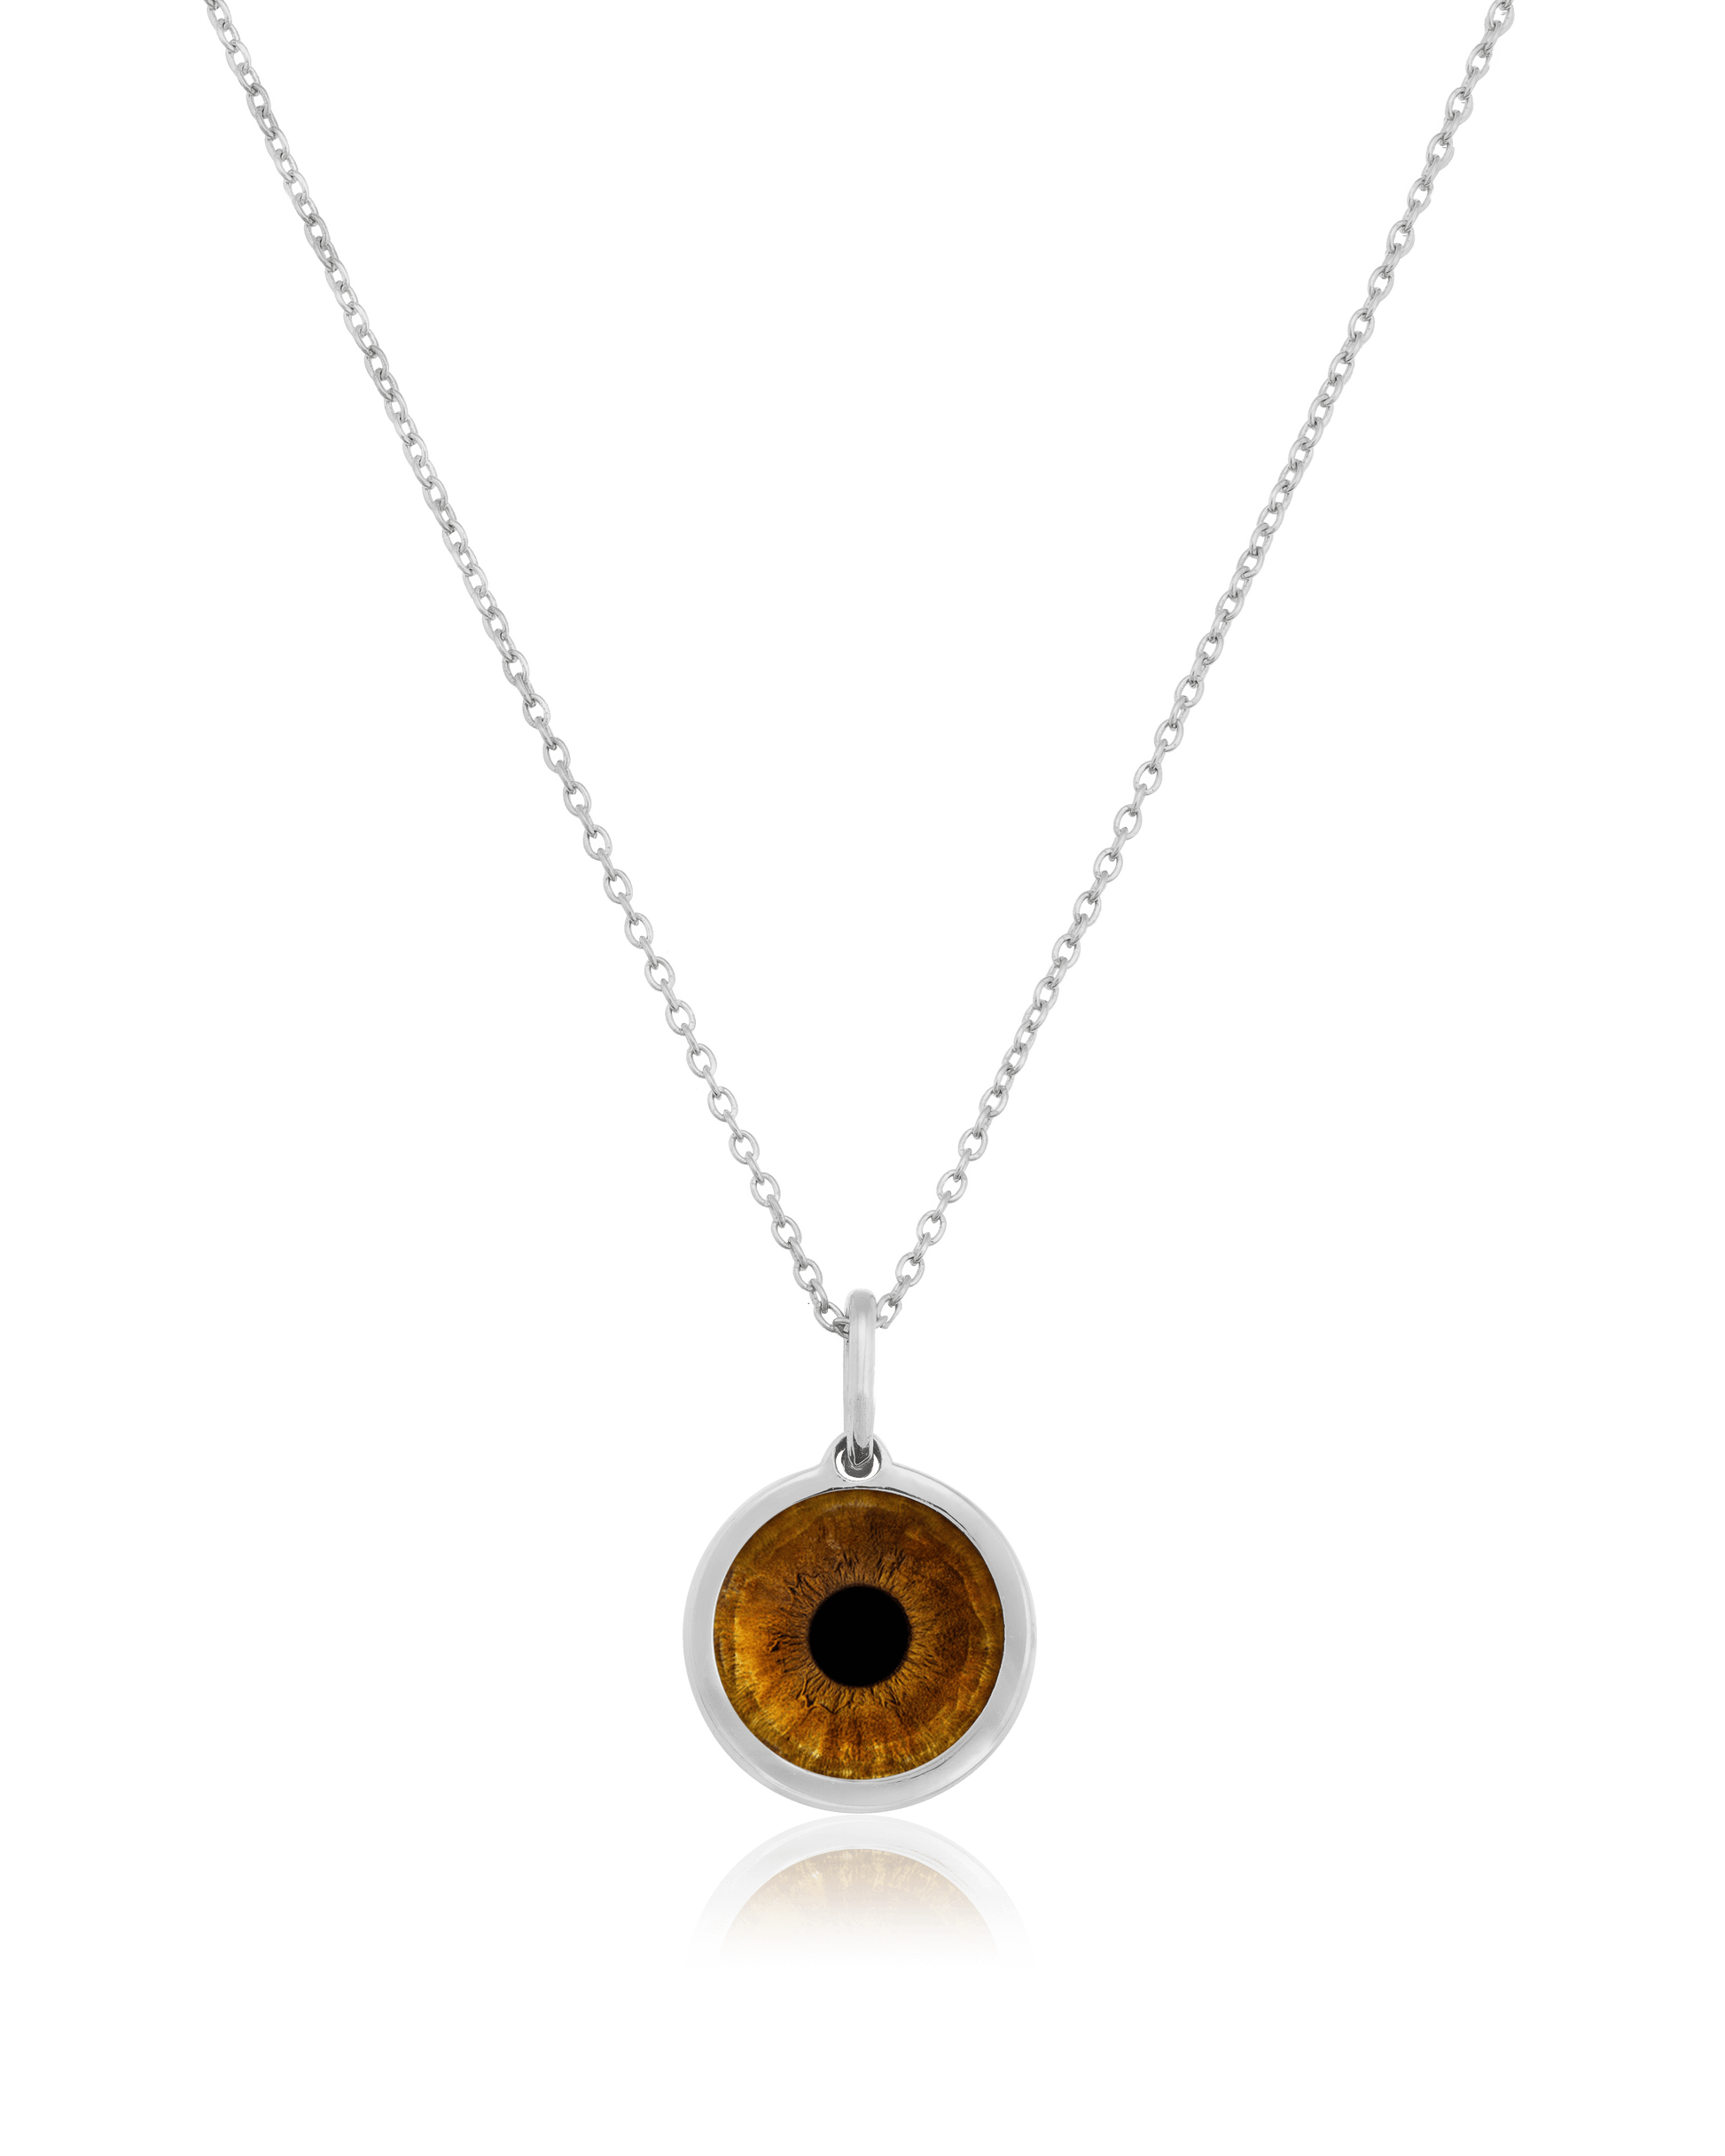 COLLIER MAGAL MY IRIS™ - Argent 925 Necklaces magal-dev 